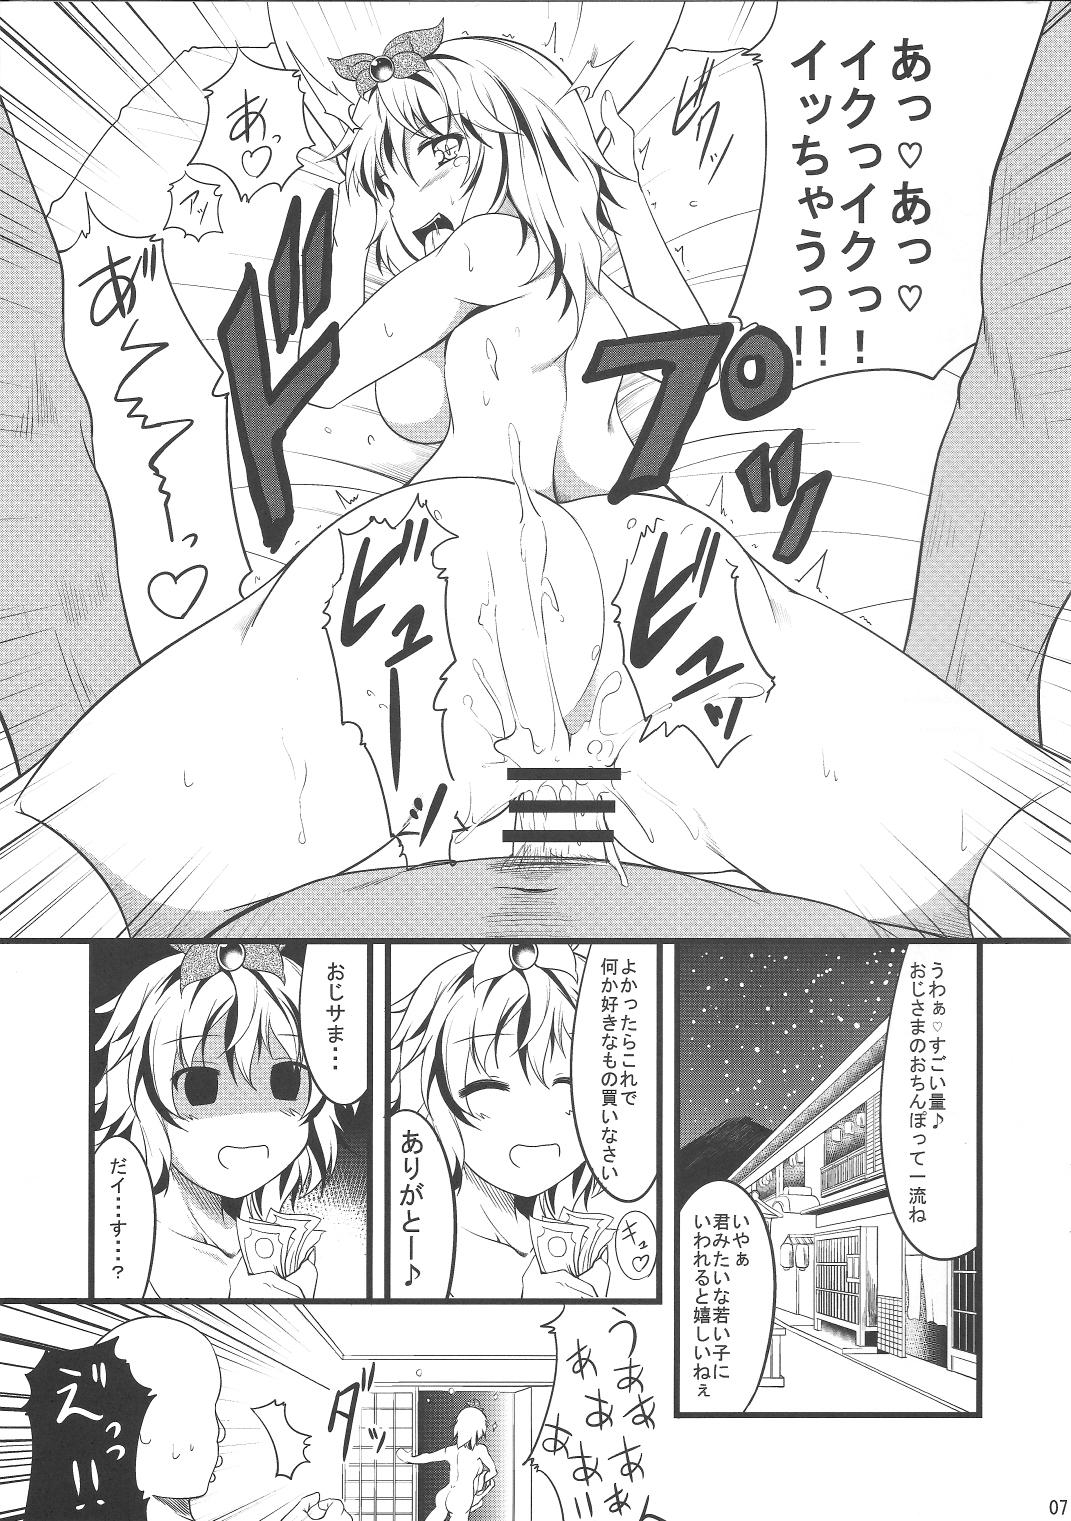 Suckingdick Jouyoku no Tora - Tiger of passion - Touhou project Curves - Page 6